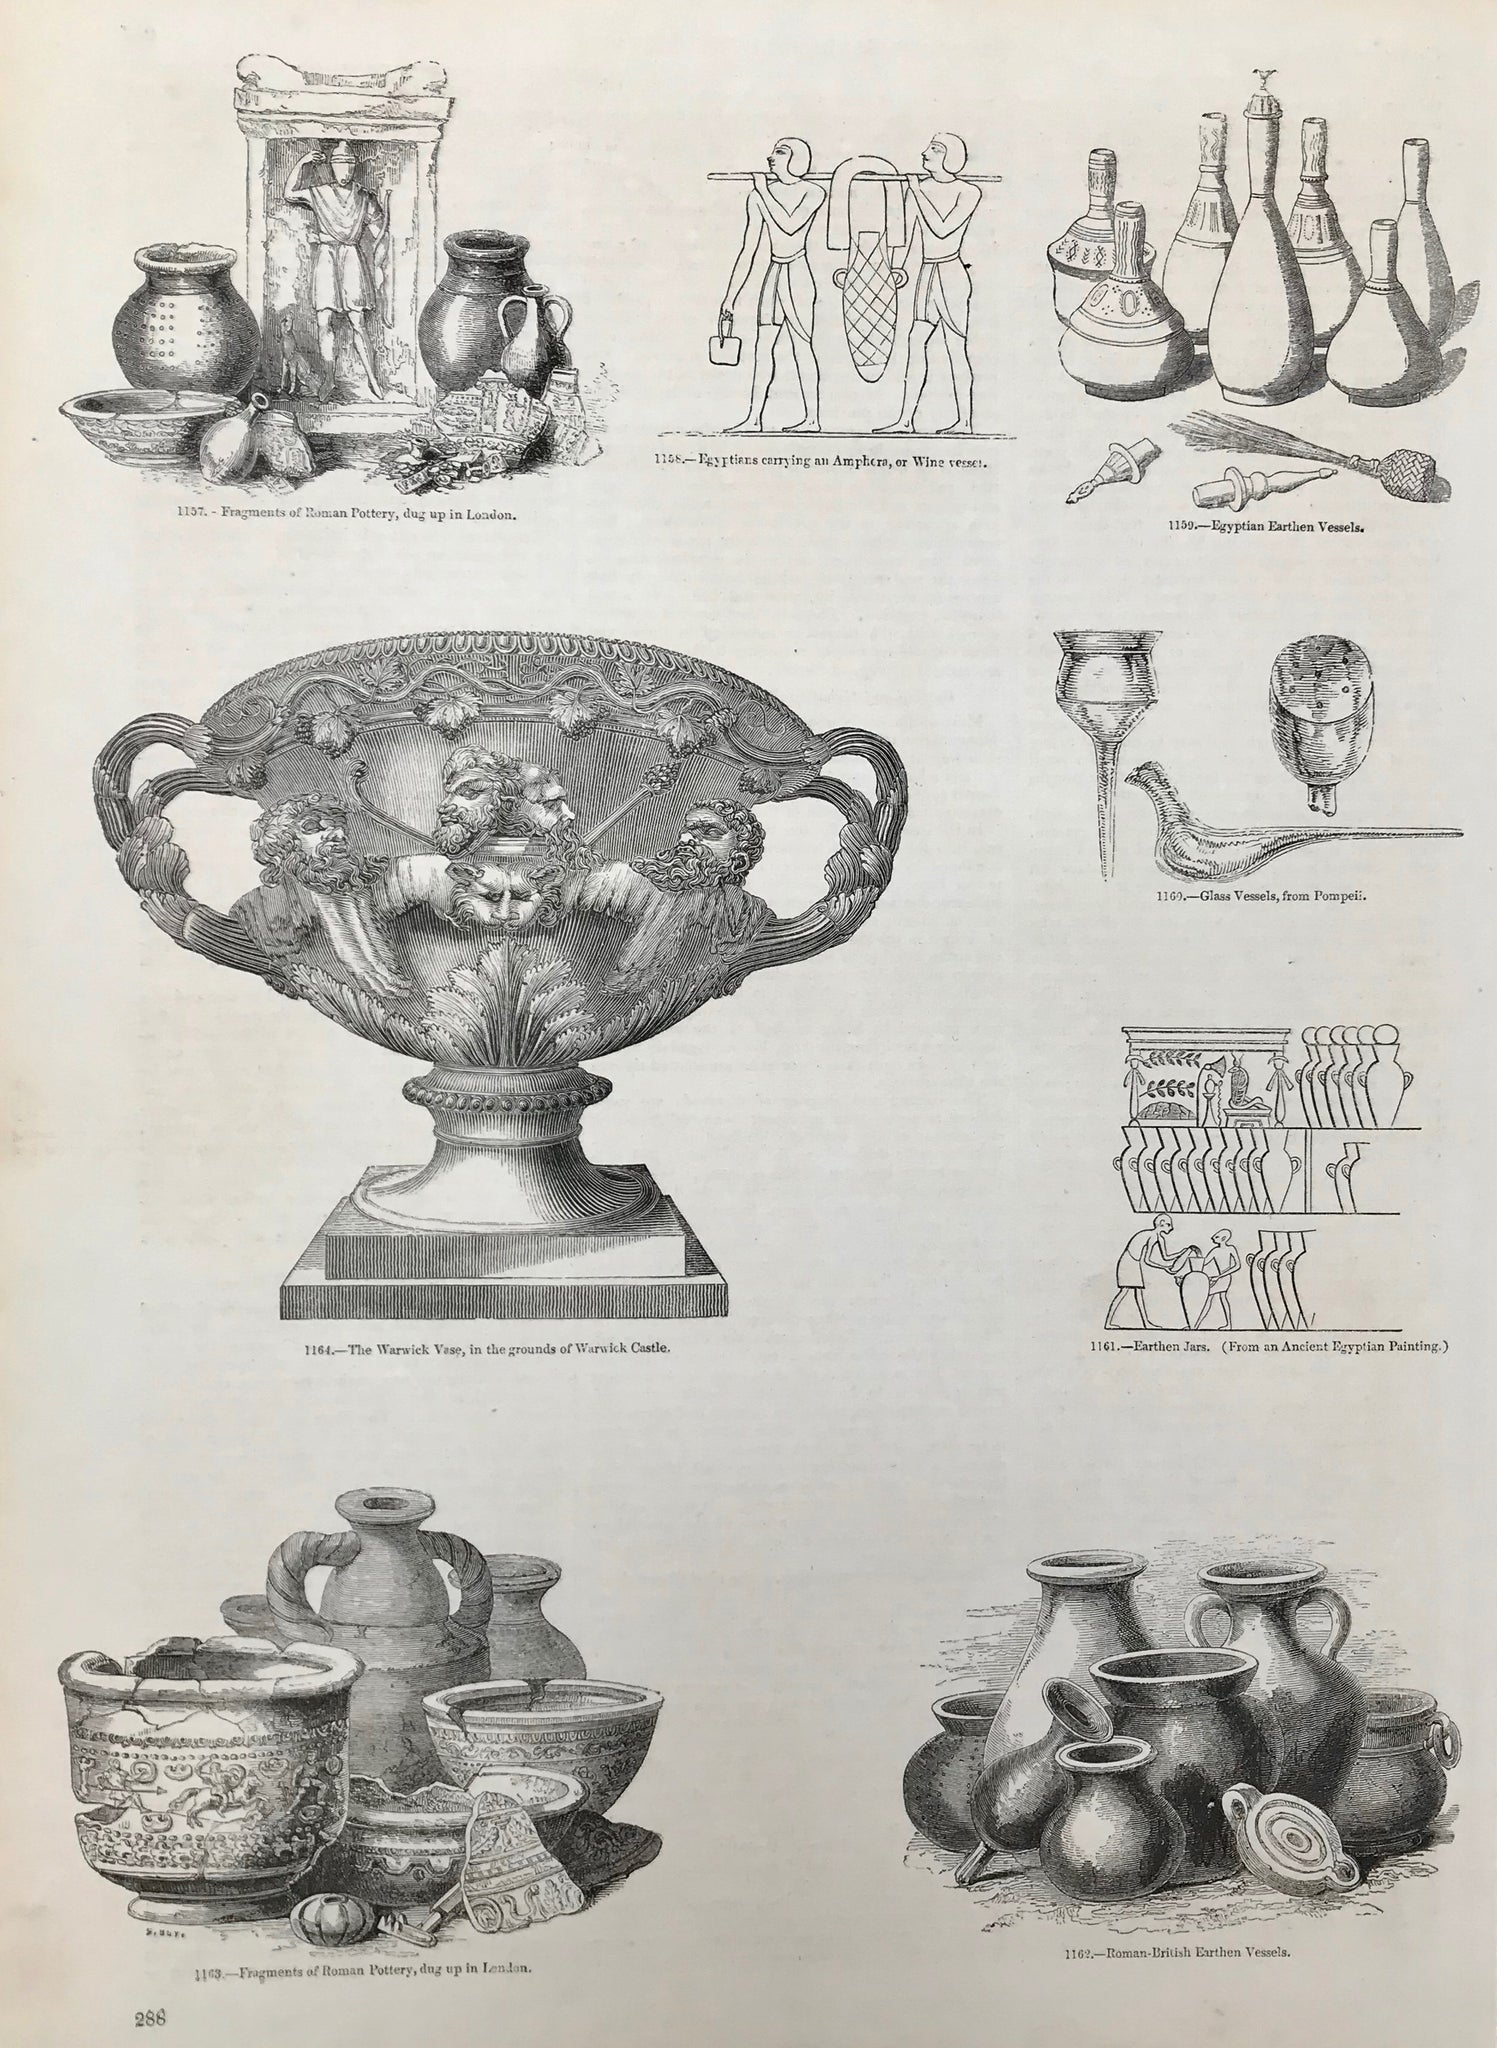 Center: The Warwick Vase, in the grounds of Warwick Castle. Roman pottery.  Wood engravings ca 1875. Backside is printed.Light browning on margin edges.